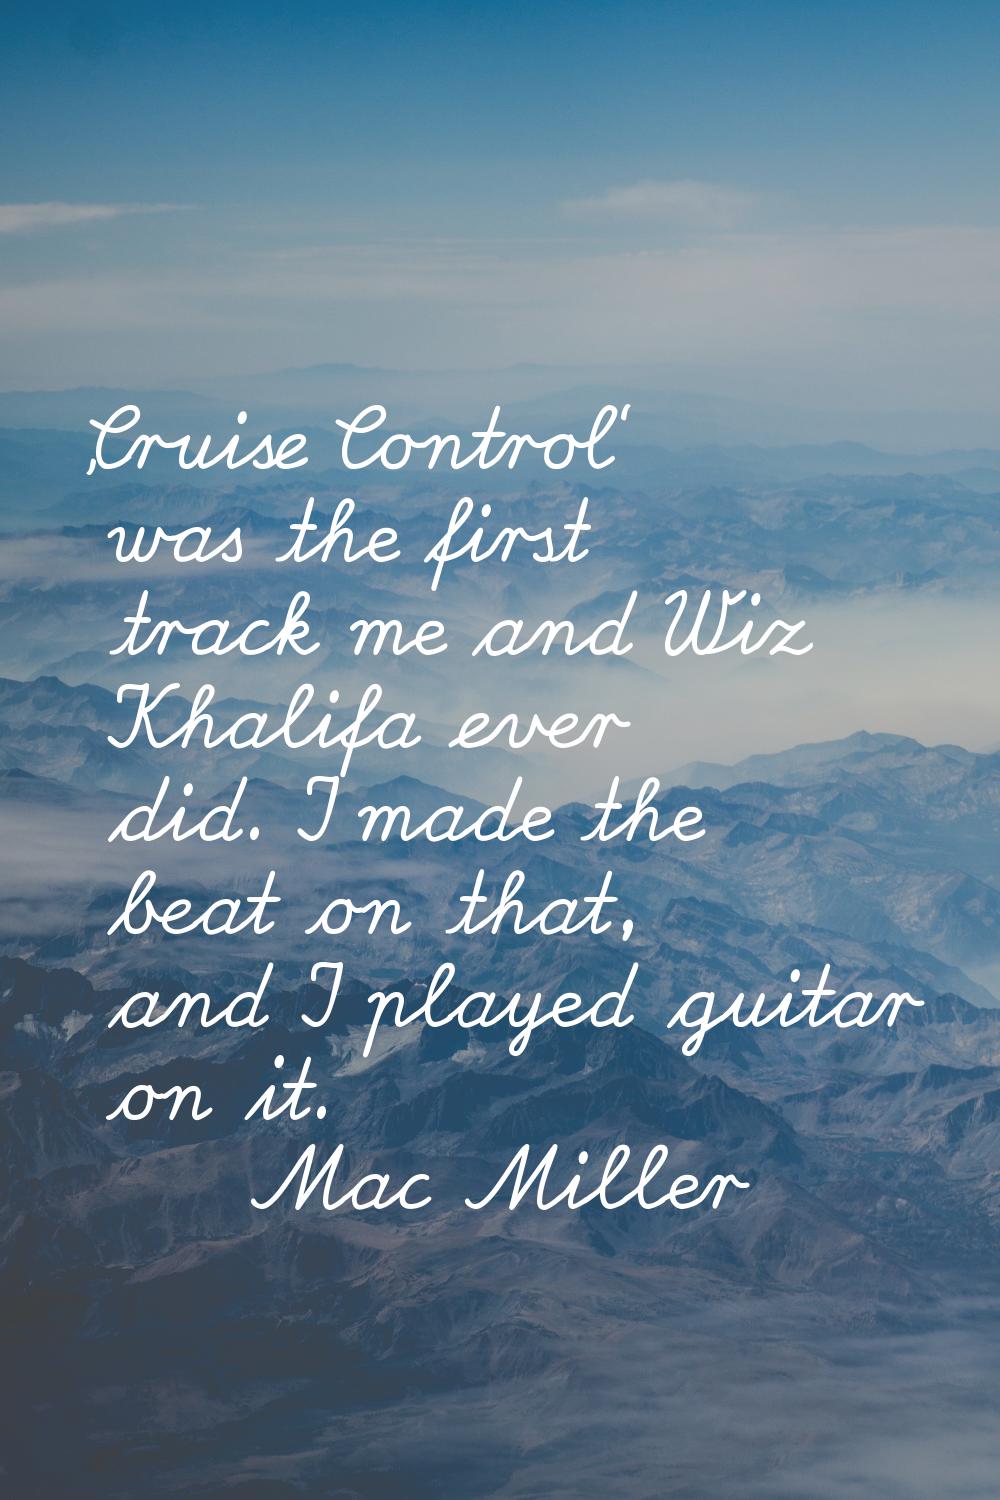 'Cruise Control' was the first track me and Wiz Khalifa ever did. I made the beat on that, and I pl